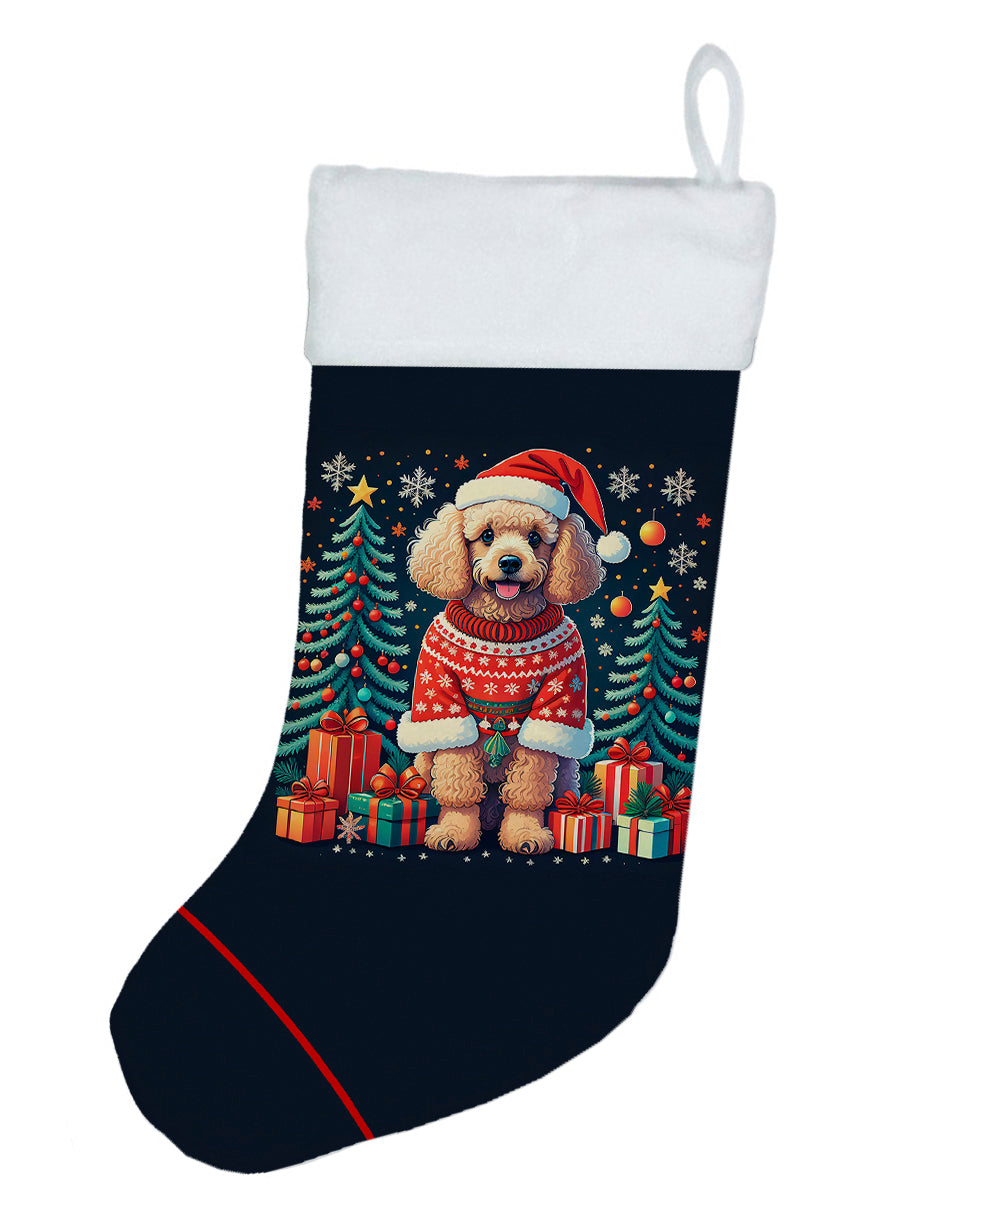 Buy this Apricot Toy Poodle Christmas Christmas Stocking